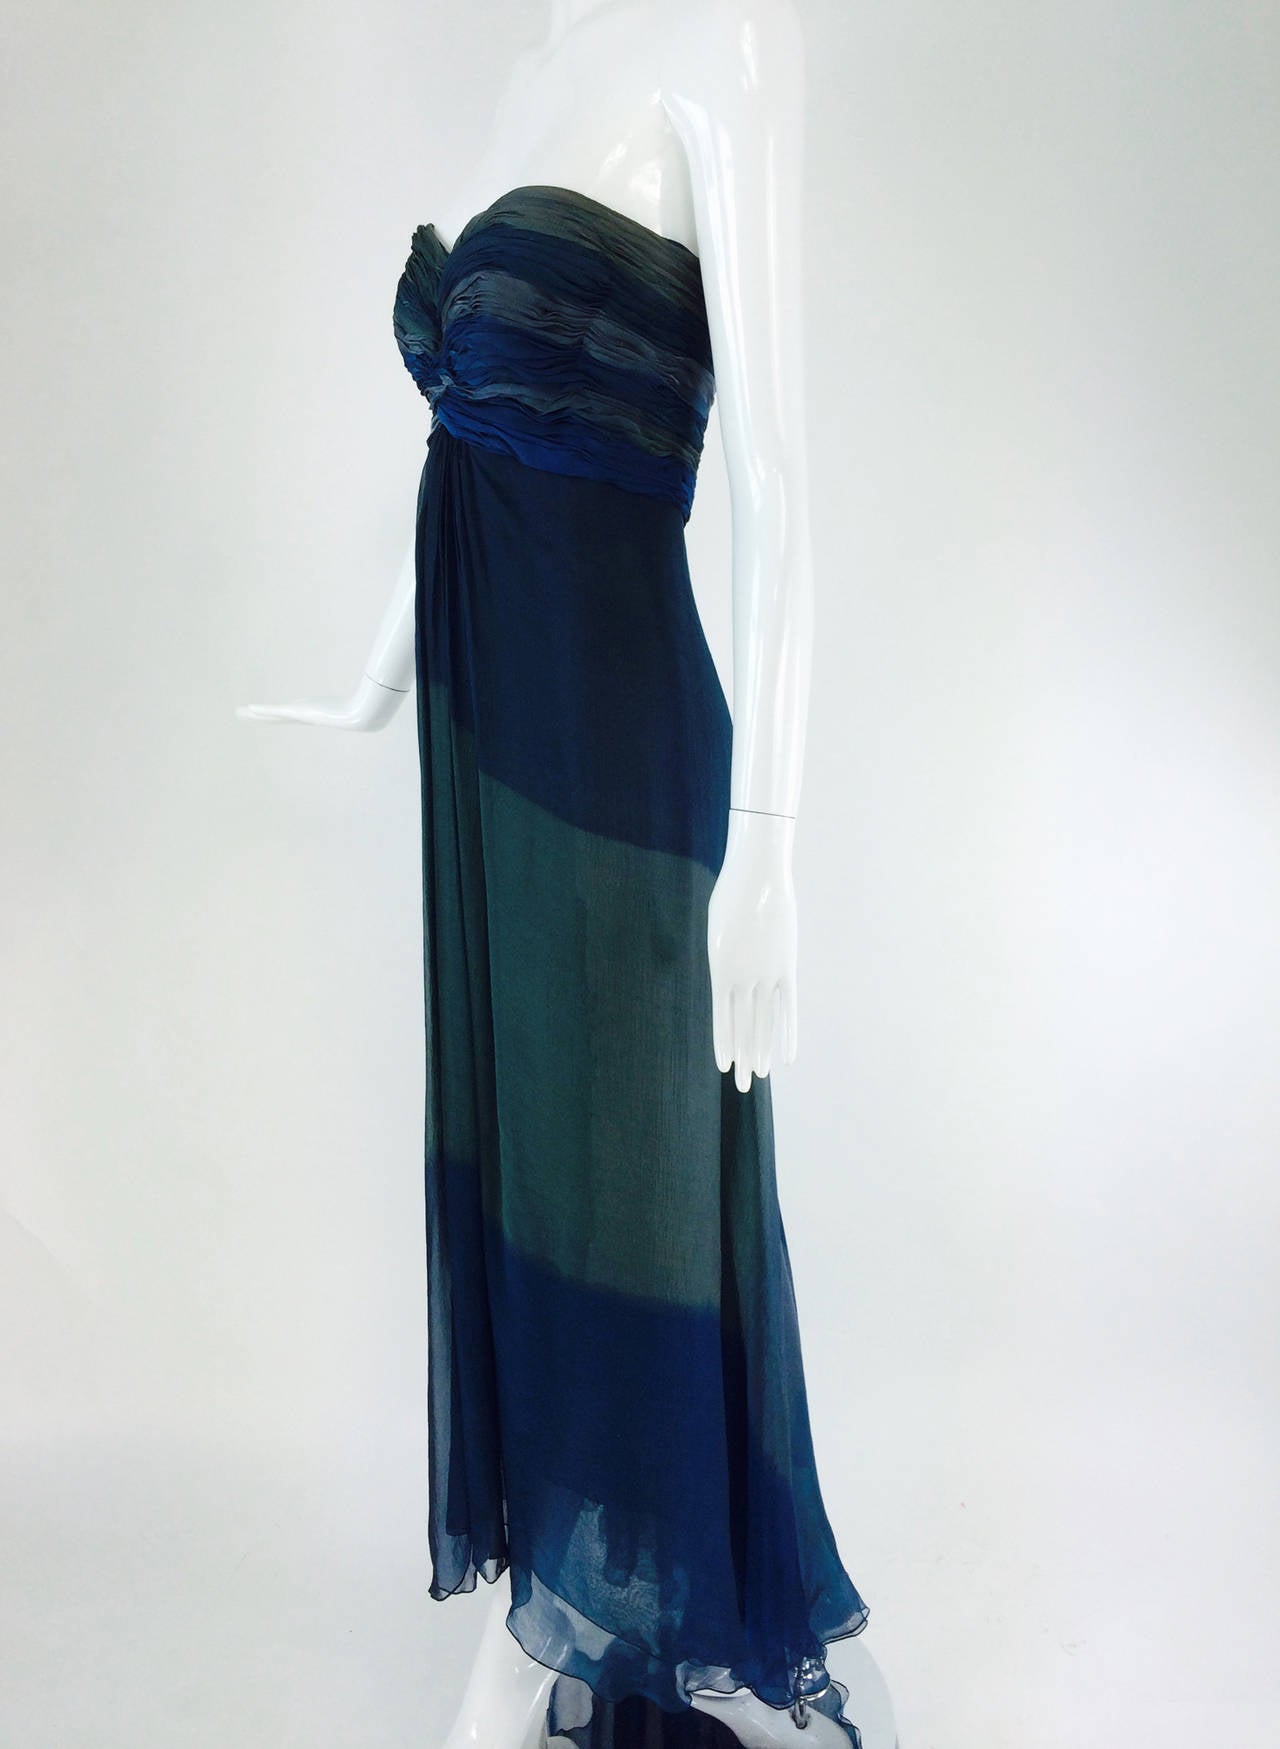 Oscar de la Renta teal tone on tone chiffon goddess gown 1970s...Strapless gown with a boned, ruched bodice...The column skirt is three layers of silk chiffon the outside is done in tonal areas similar to ombre dying, the shades of teal, aqua and